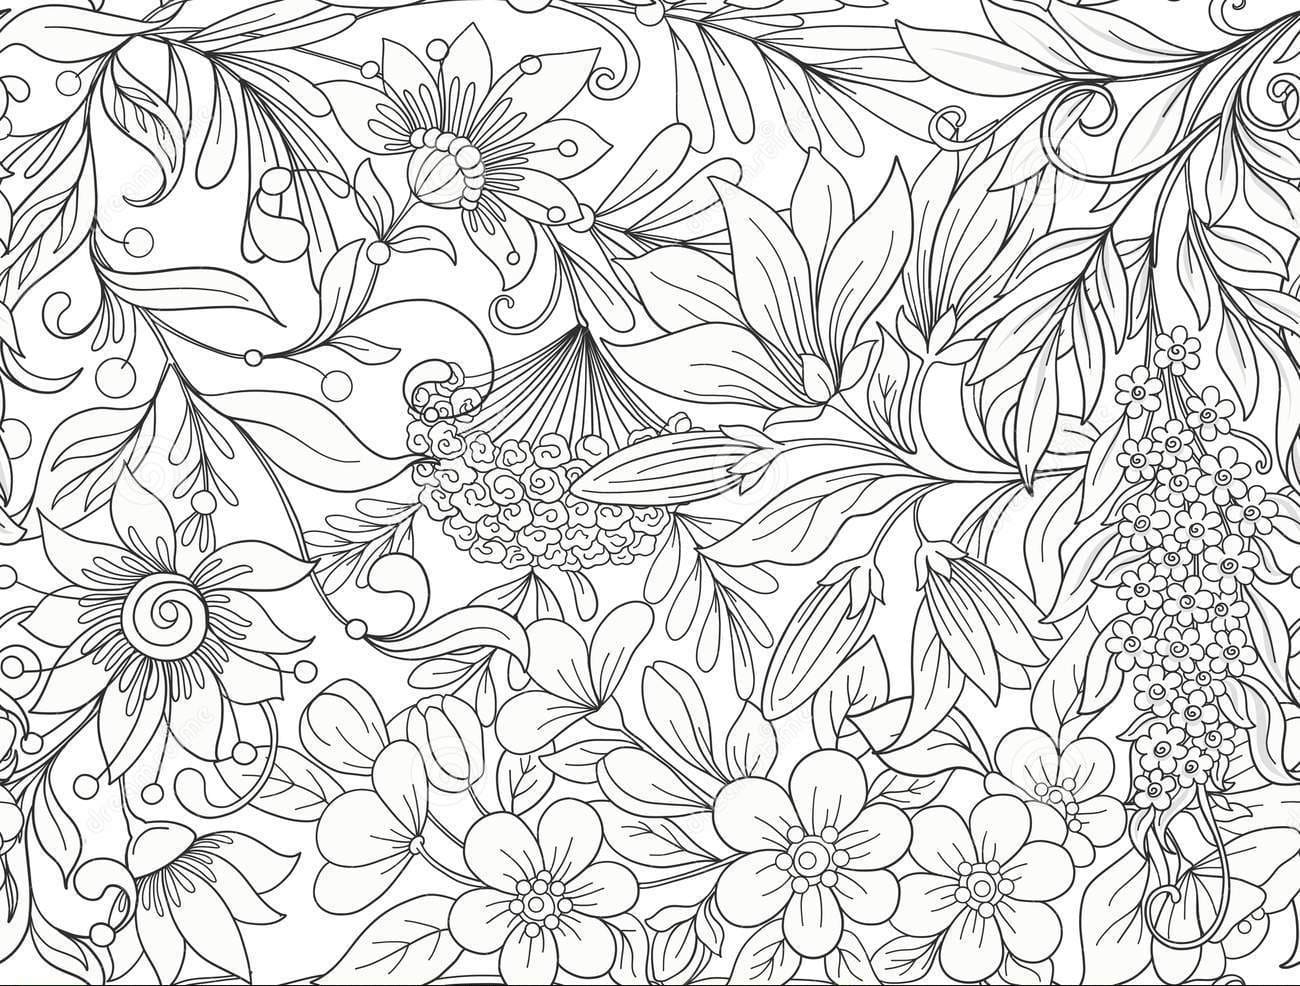 Coloring book Magnolia Free Coloring Pages - Coloring Cool